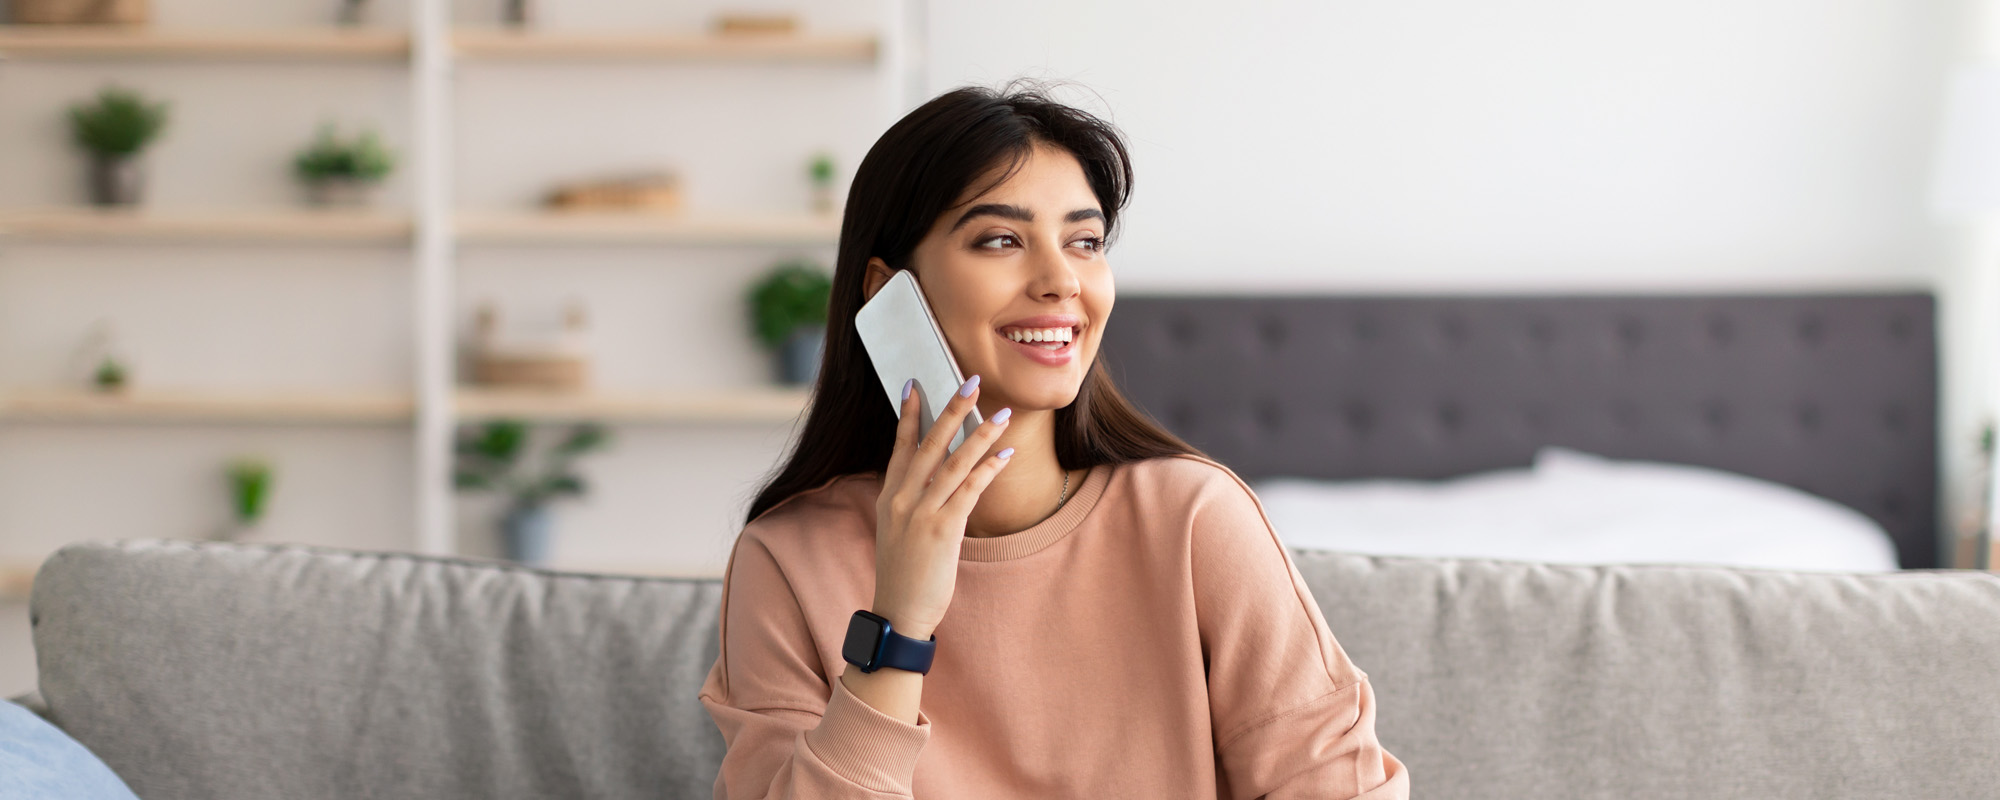 portrait of smiling woman talking on phone